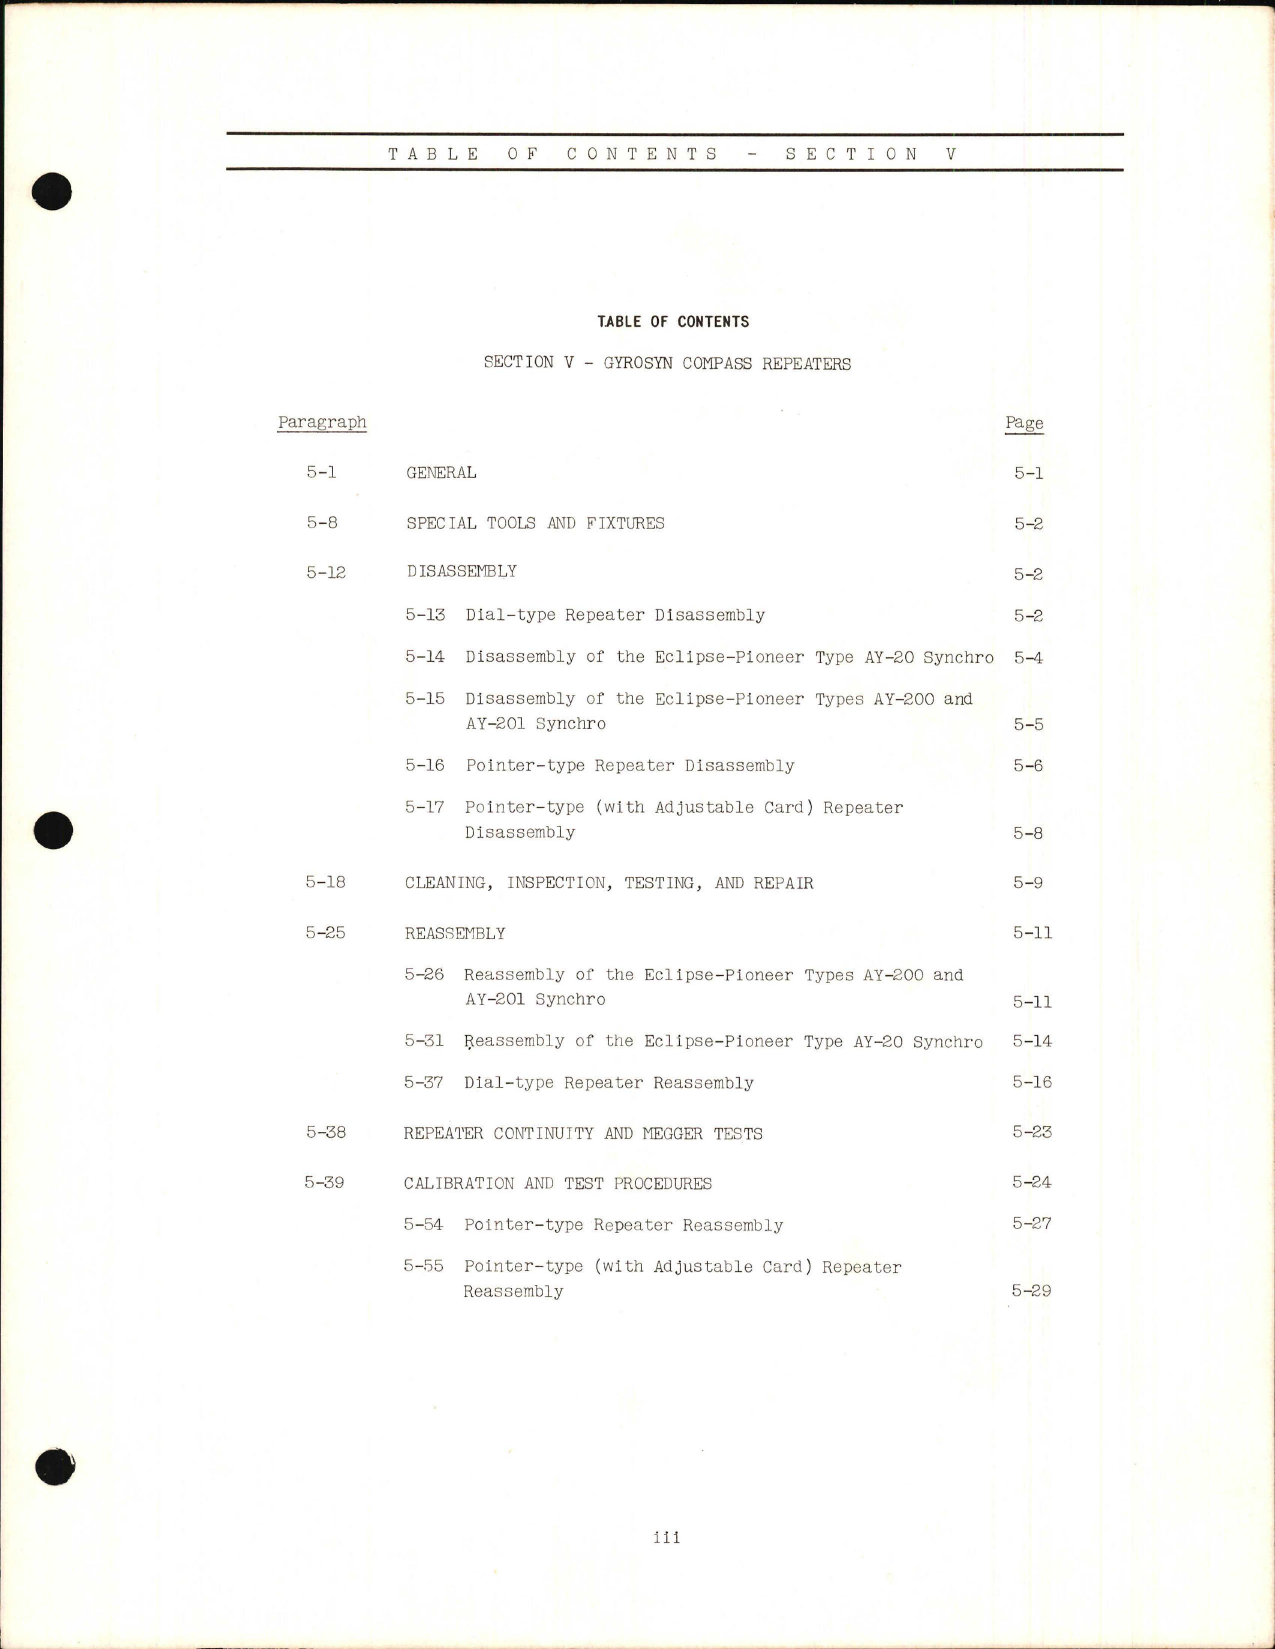 Sample page 5 from AirCorps Library document: Overhaul and Parts List for Gyrosyn Compass Models C-2 and C-2A